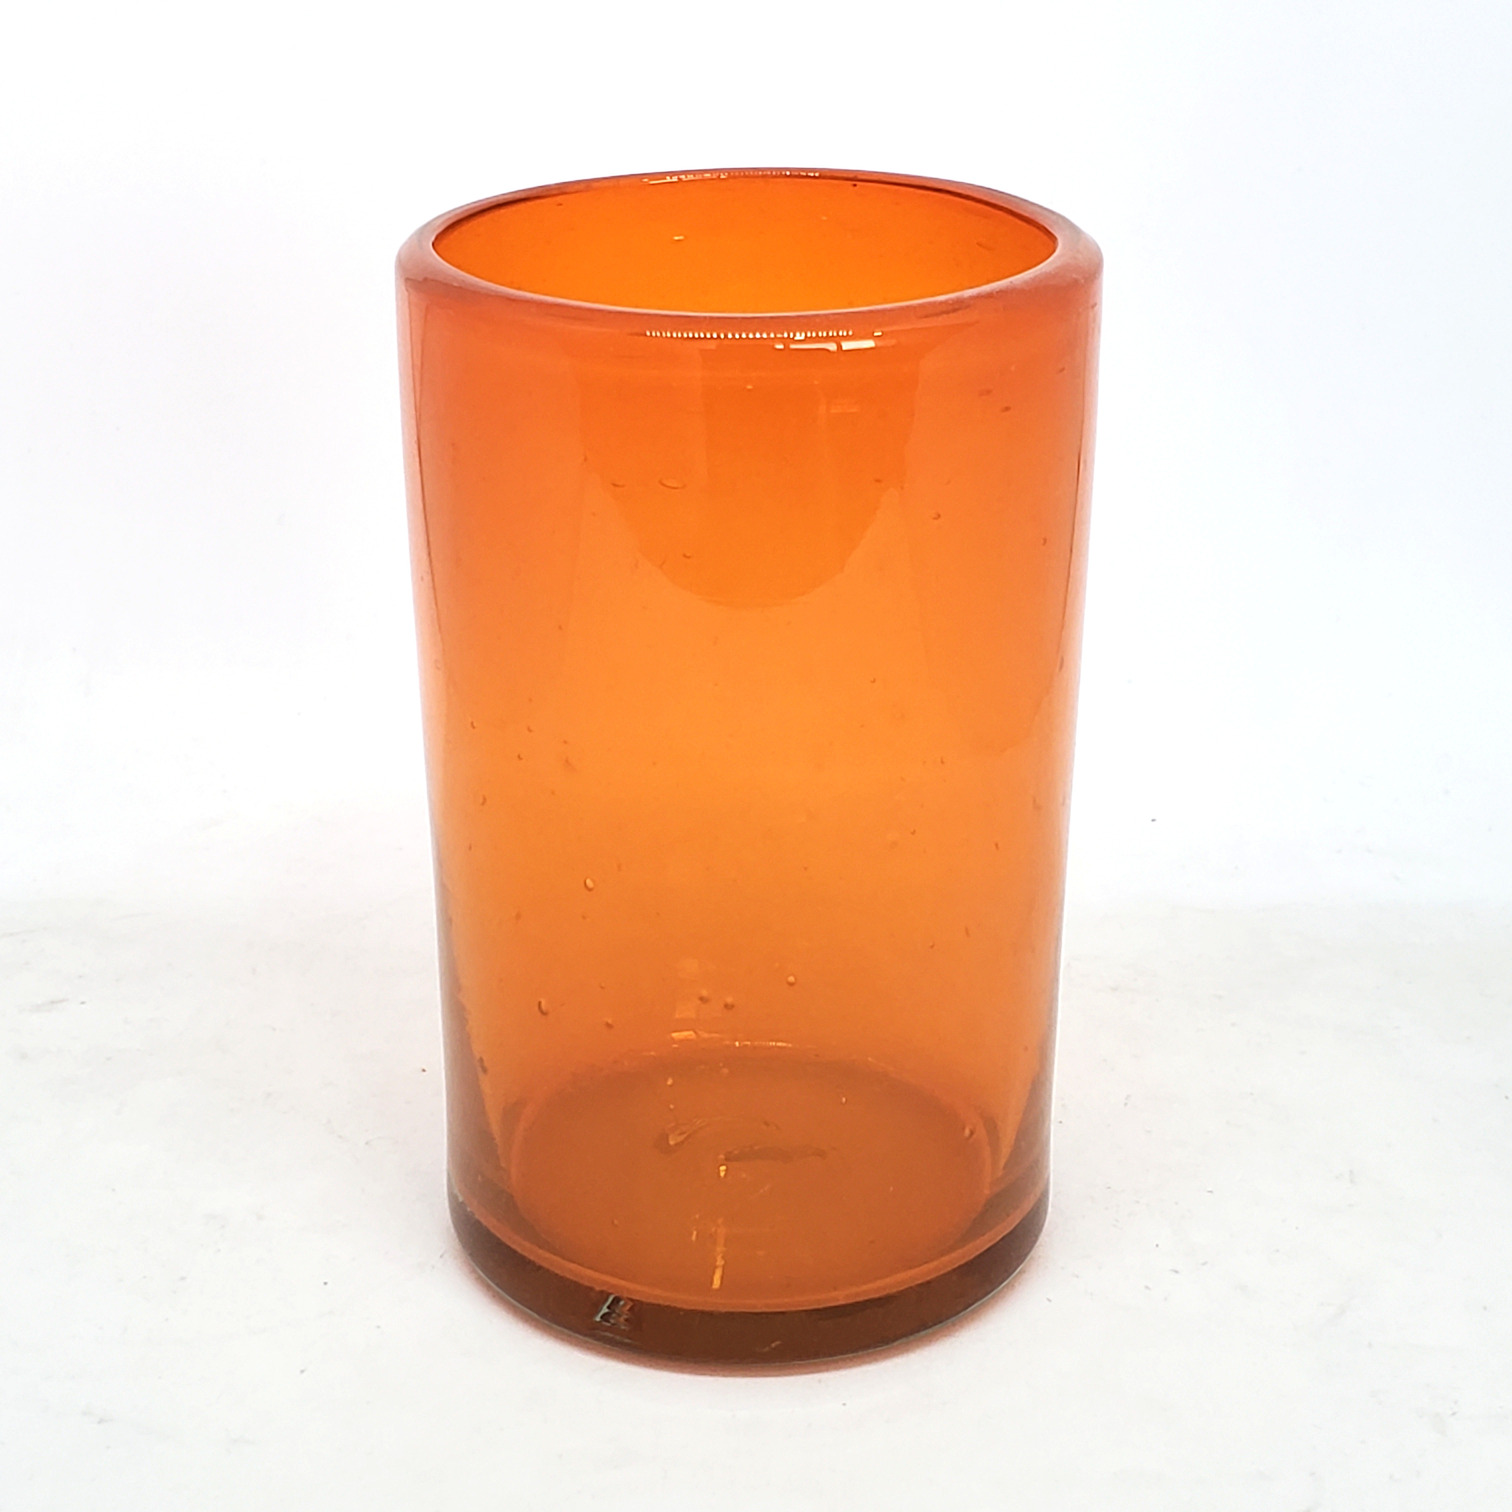 Wholesale MEXICAN GLASSWARE / Solid Orange 14 oz Drinking Glasses  / These handcrafted glasses deliver a classic touch to your favorite drink.